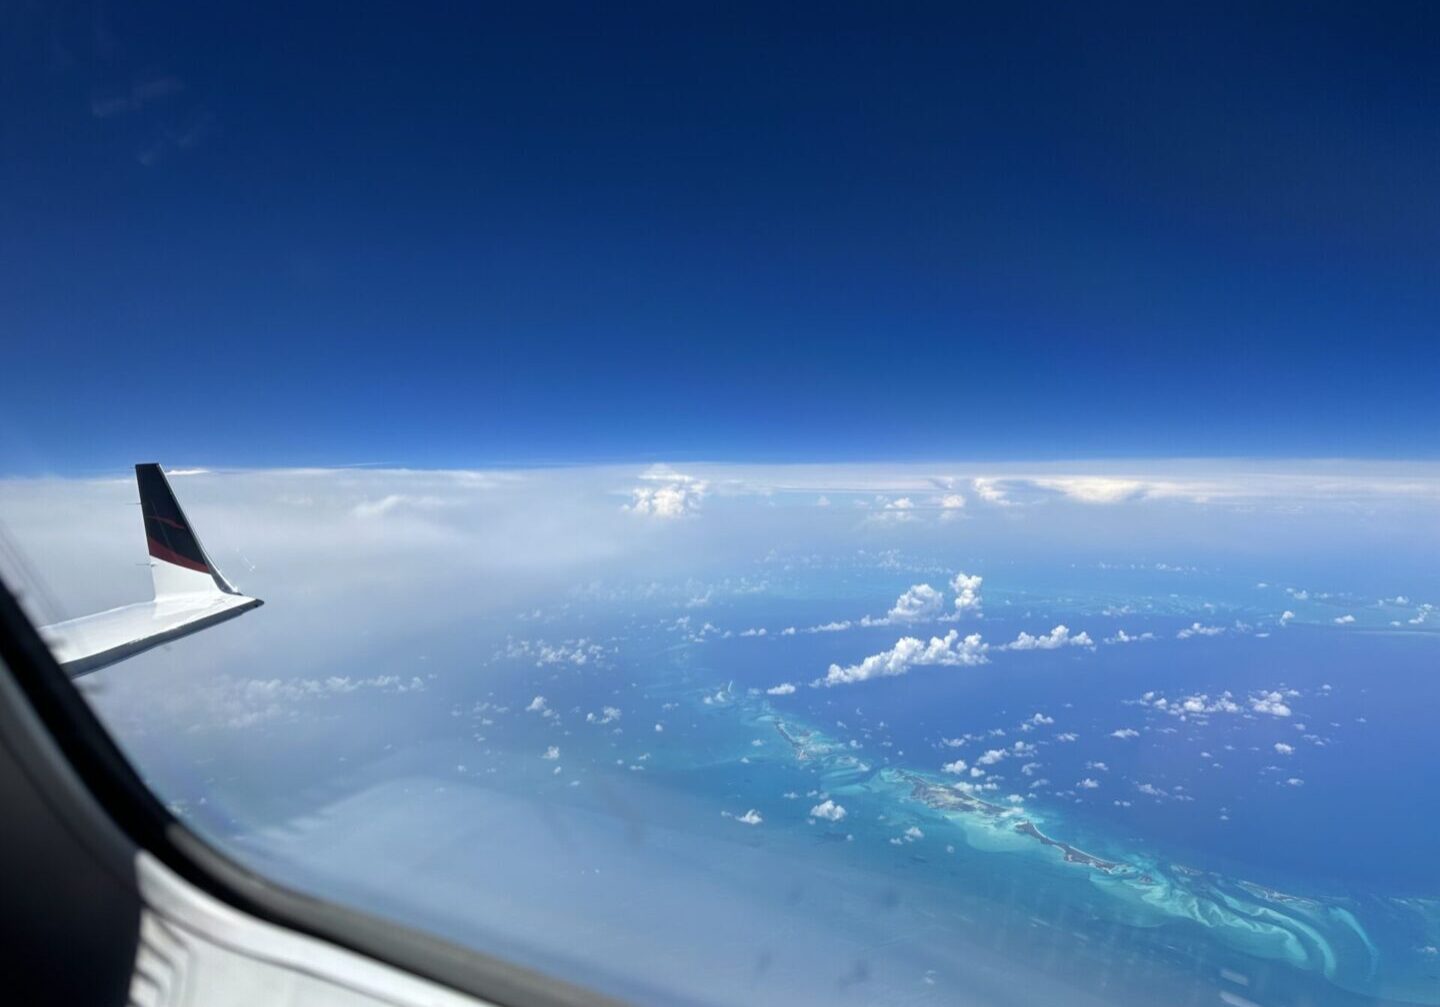 A view of the ocean from an airplane window.